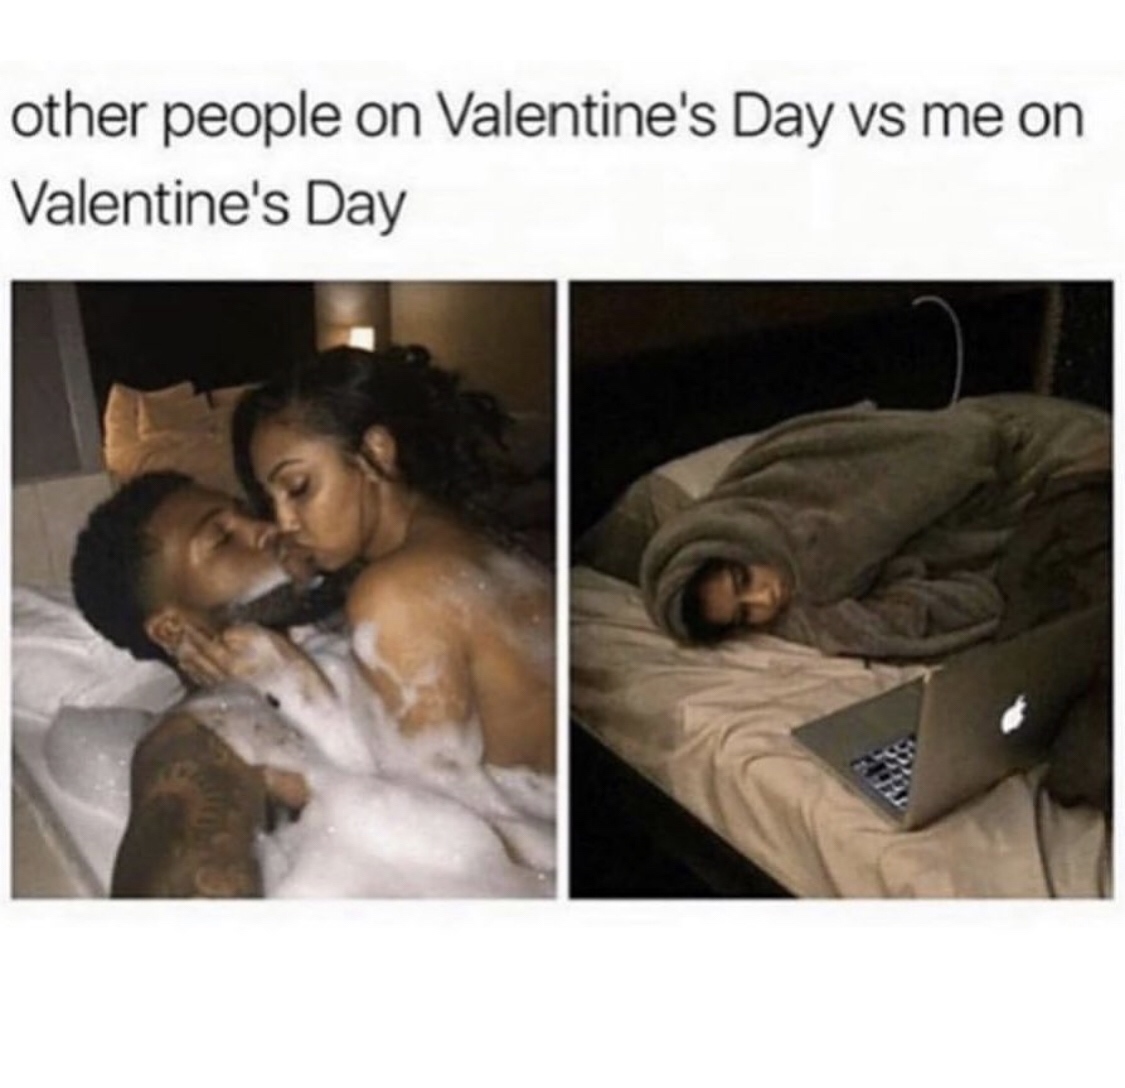 valentines day others vs me - other people on Valentine's Day vs me on Valentine's Day